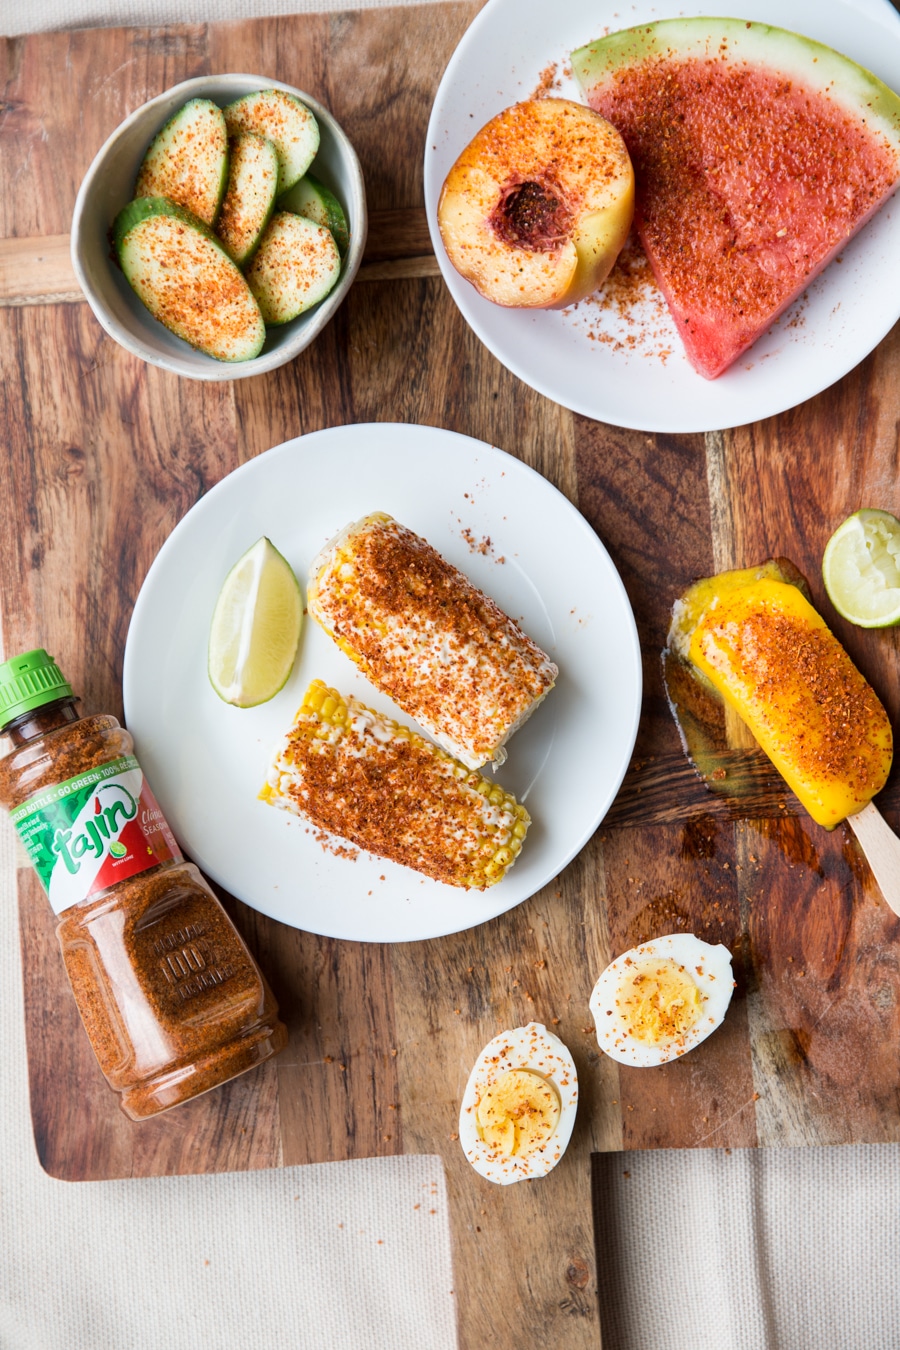 5 Ways to Use the New Trader Joe's Elote Seasoning - Cupcakes & Cashmere